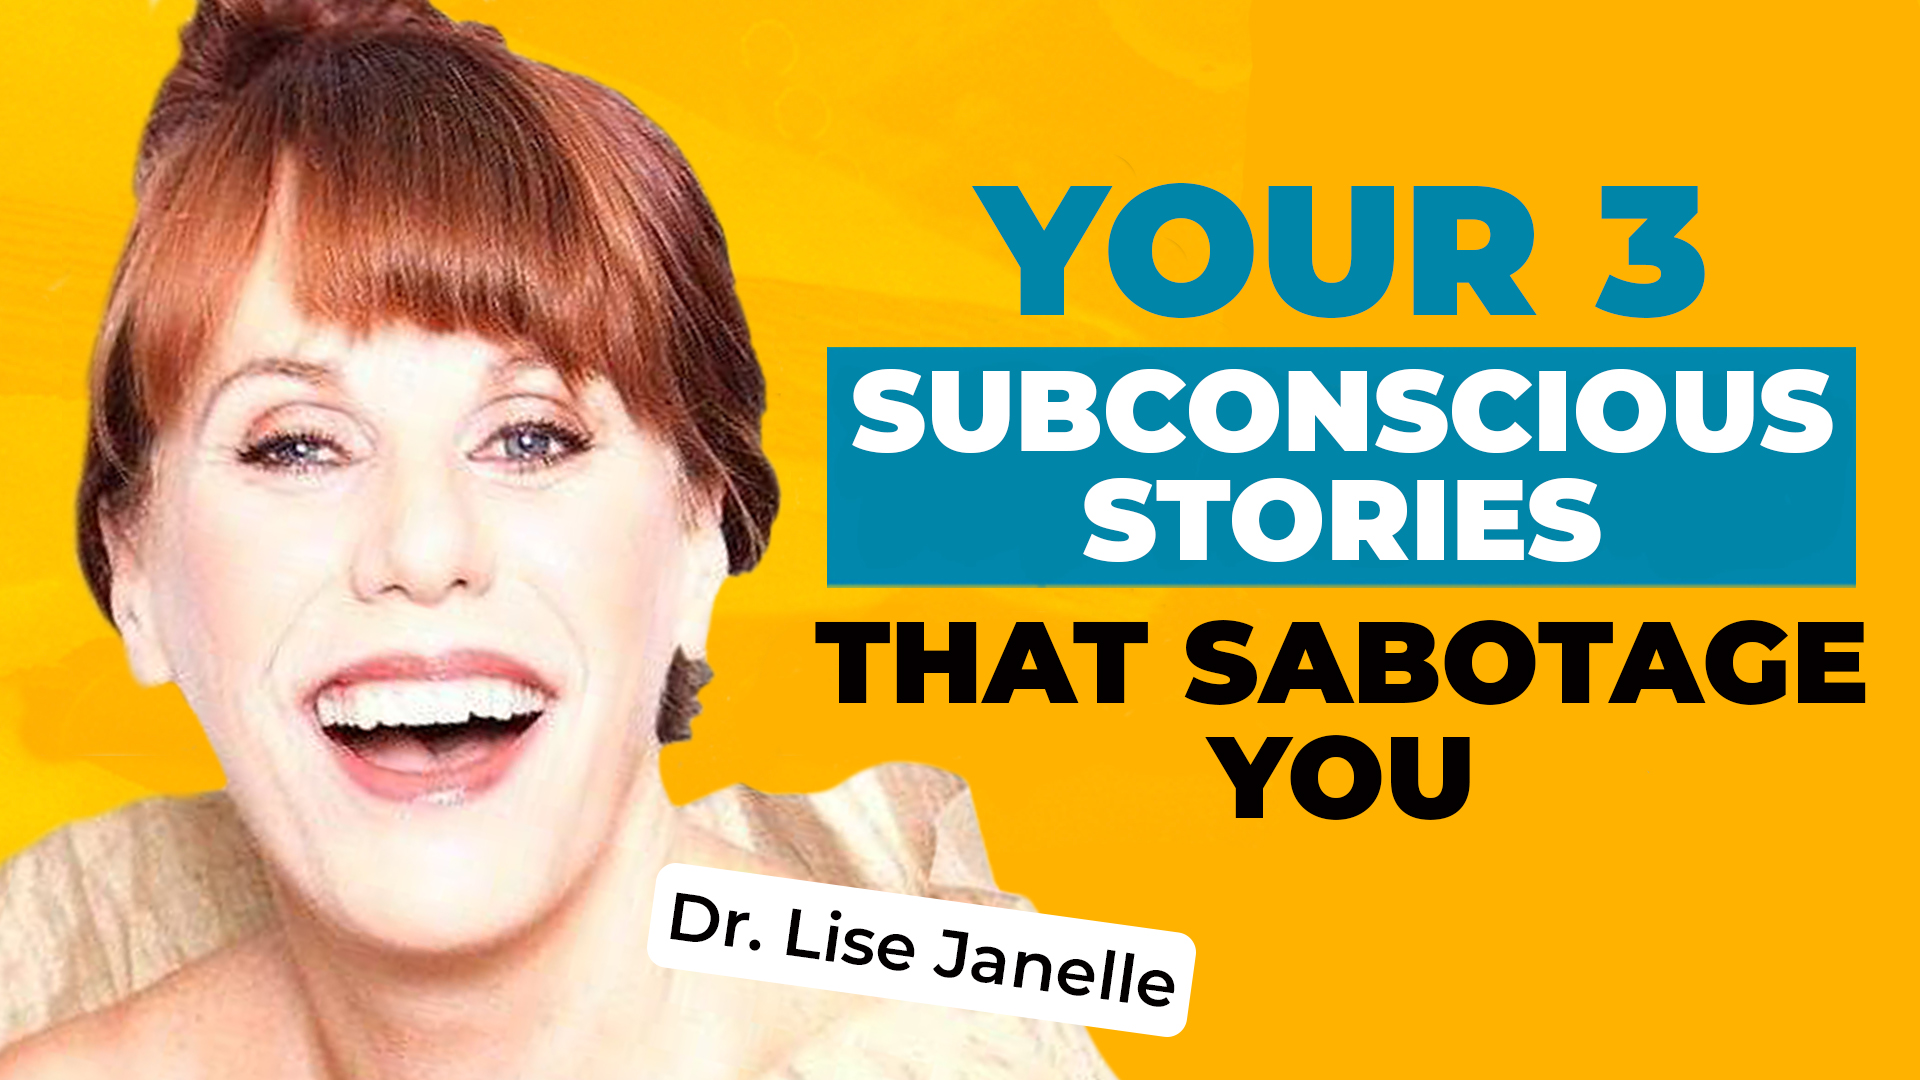 Headshot of Lise Janelle on a bold yellow background, along with text reading "Your 3 Subconscious Stories that Sabotage You"